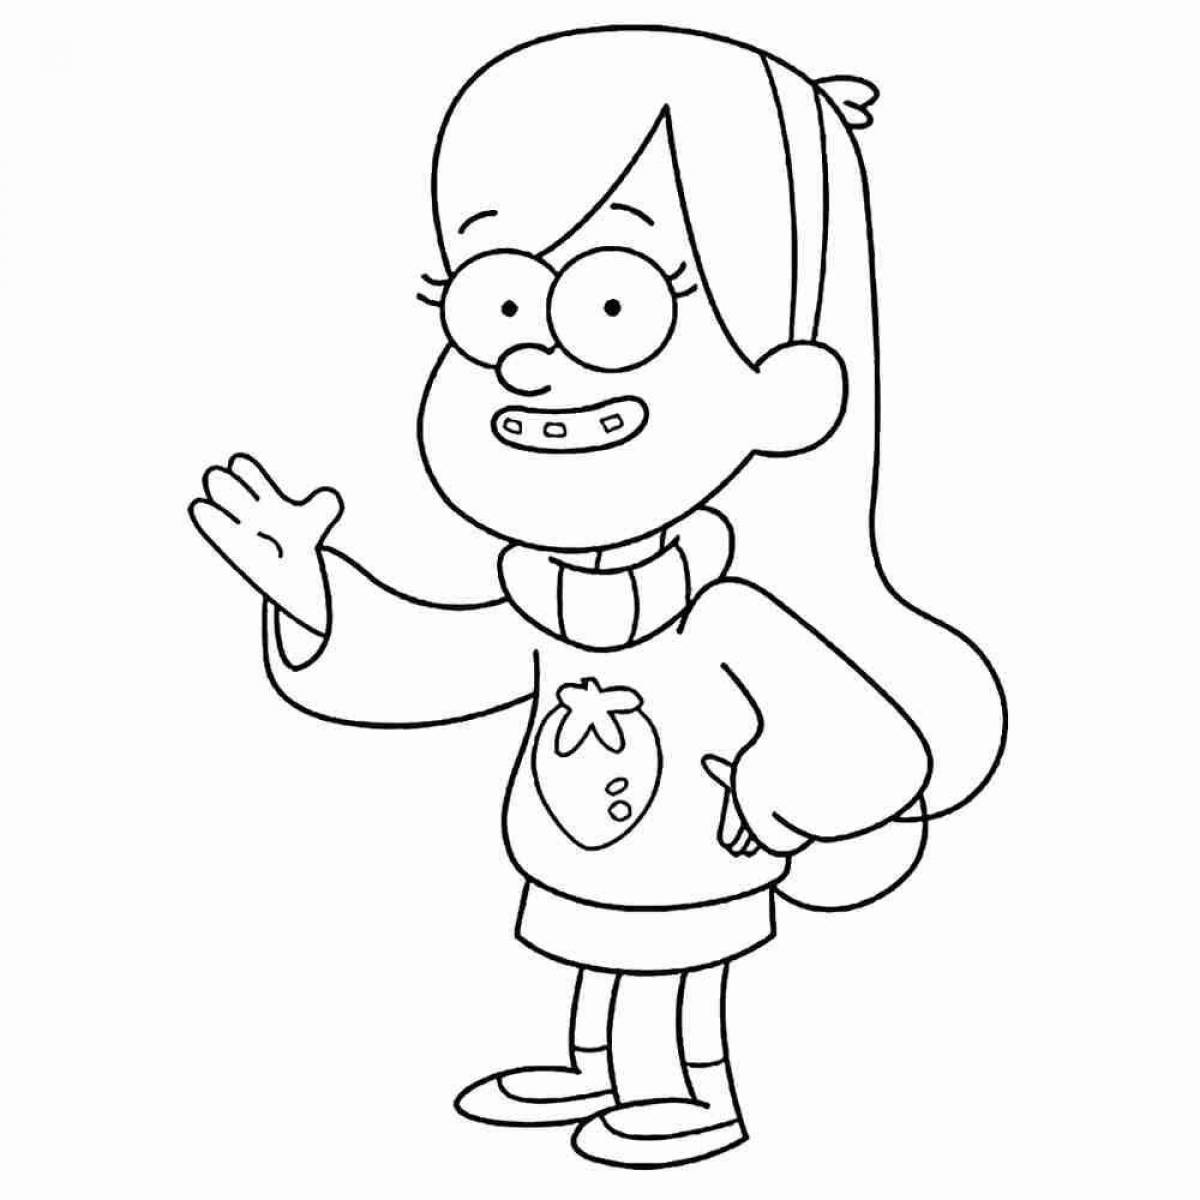 Bright mabel from gravity falls